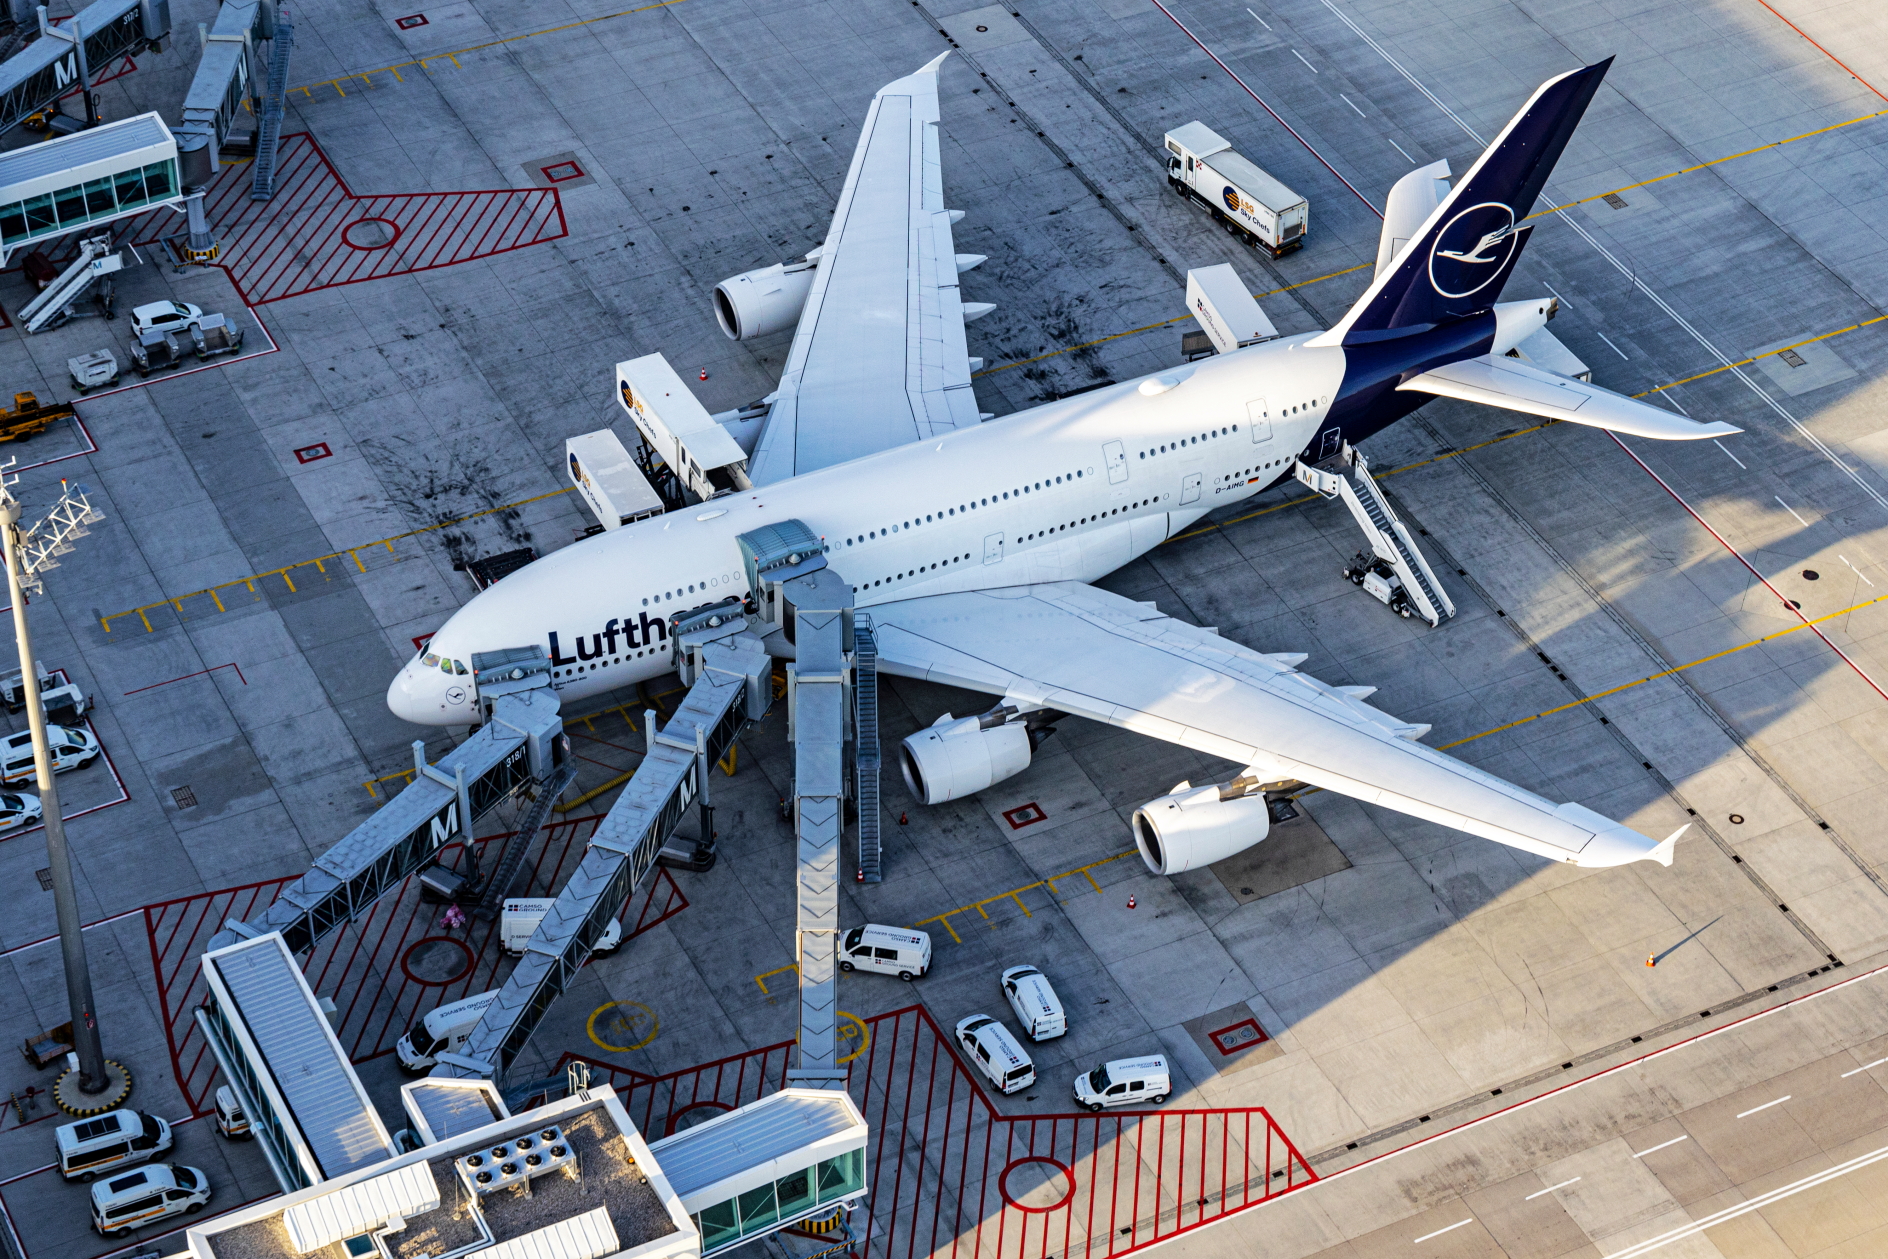 Lufthansa A380 at Munich Airport. Click to enlarge.